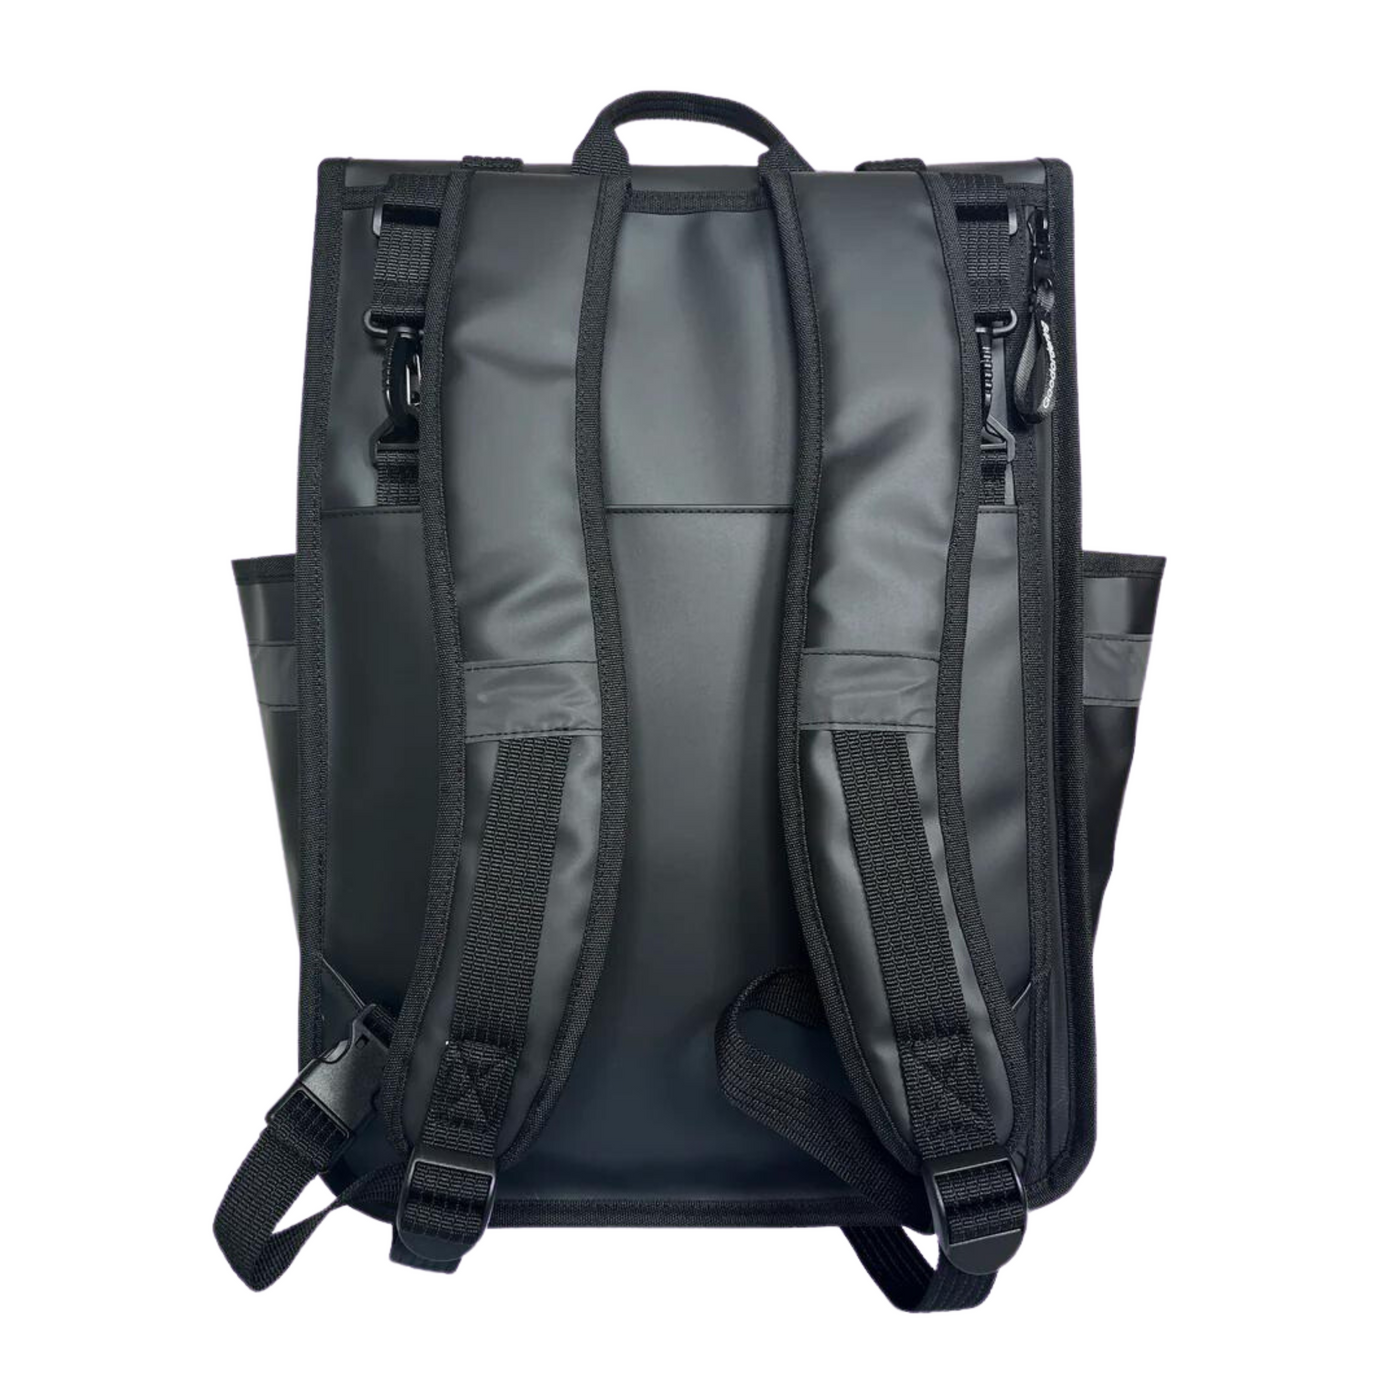 Goodordering Eco Monochrome Rolltop Backpack Pannier Black - Radical Giving